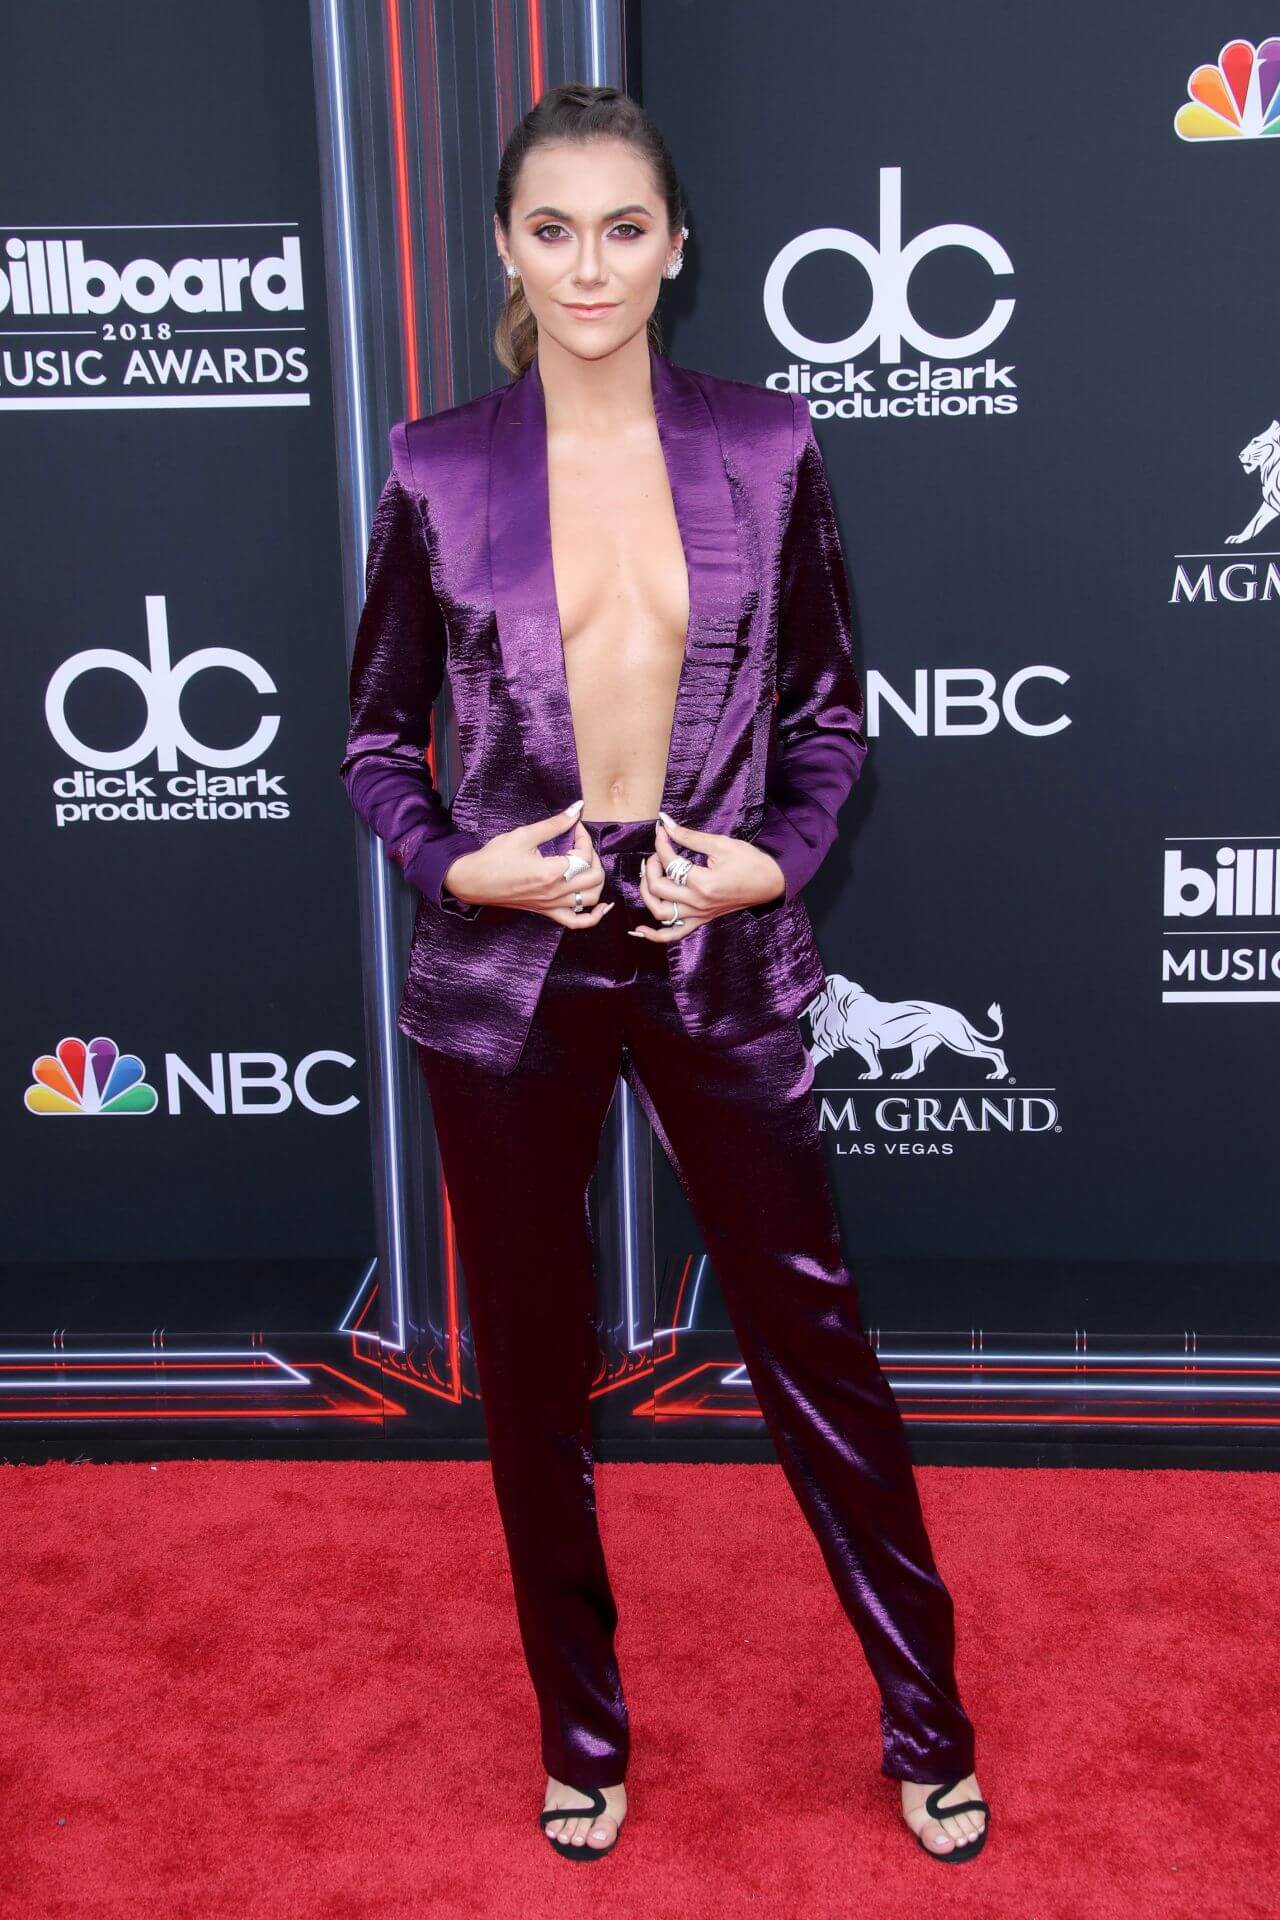 Alyson Stoner - In Purple Shiny Pantsuits Outfits